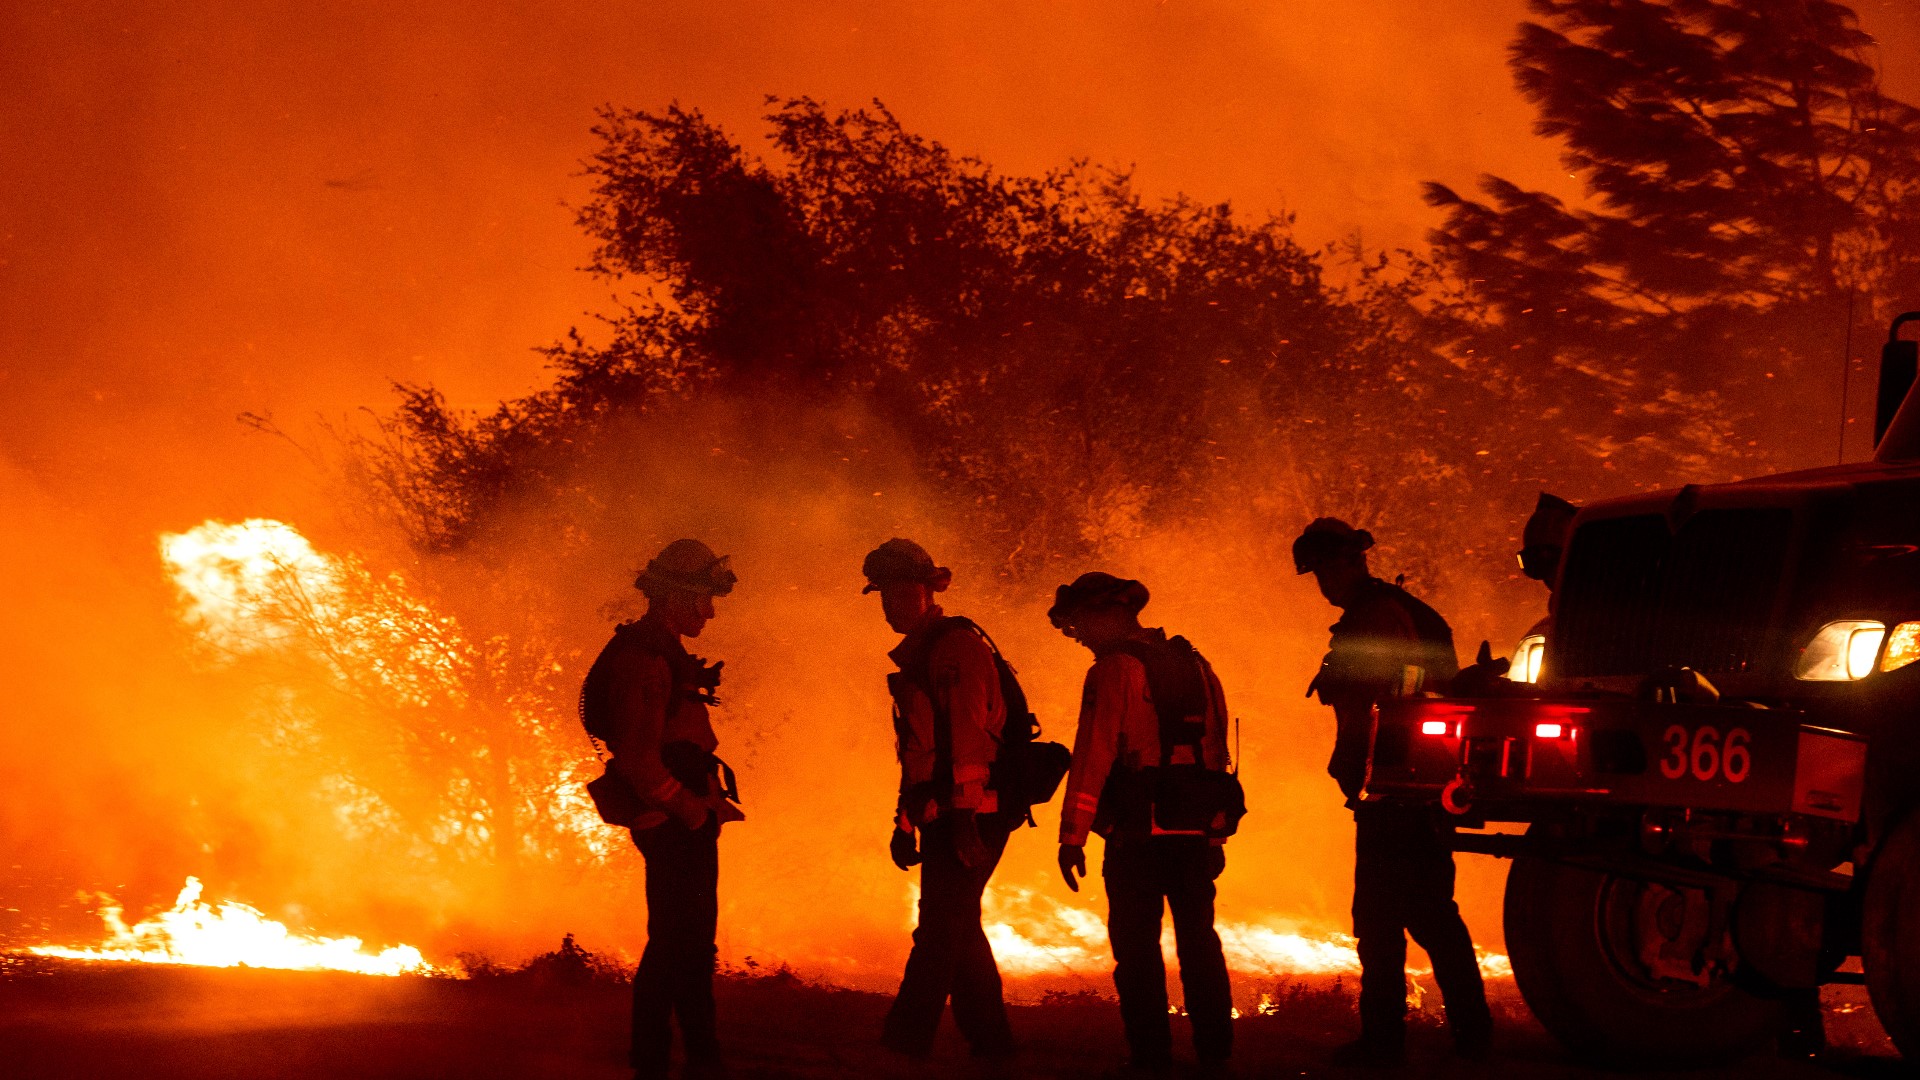 According to a new study out of University of California, Los Angeles, human-induced climate change is the main driver of increasing Western wildfire weather.